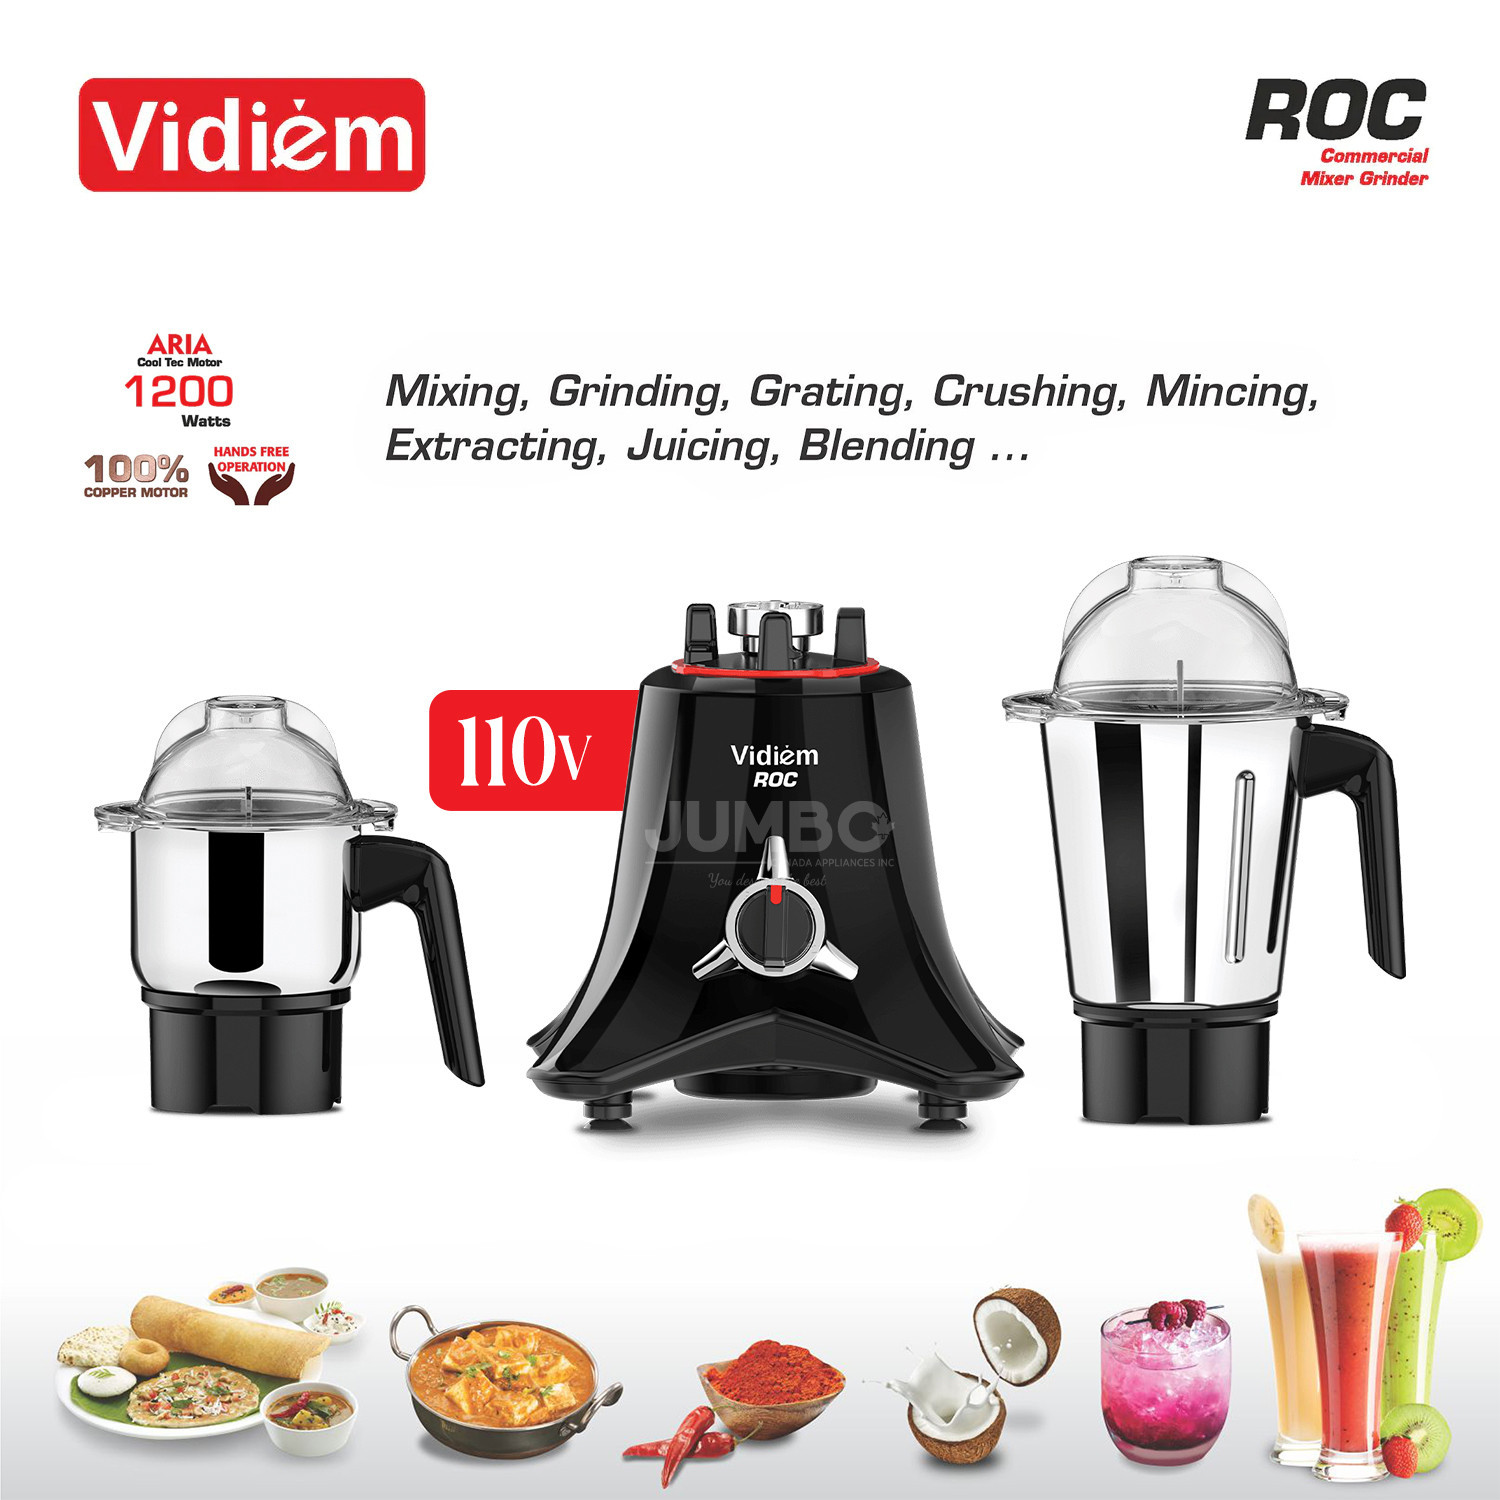 vidiem-roc-1200w-110v-commercial-residential-mixer-grinder-stainless-steel-jars-indian-mixer-grinder-spice-coffee-grinder-jar-for-use-in-canada-usa1